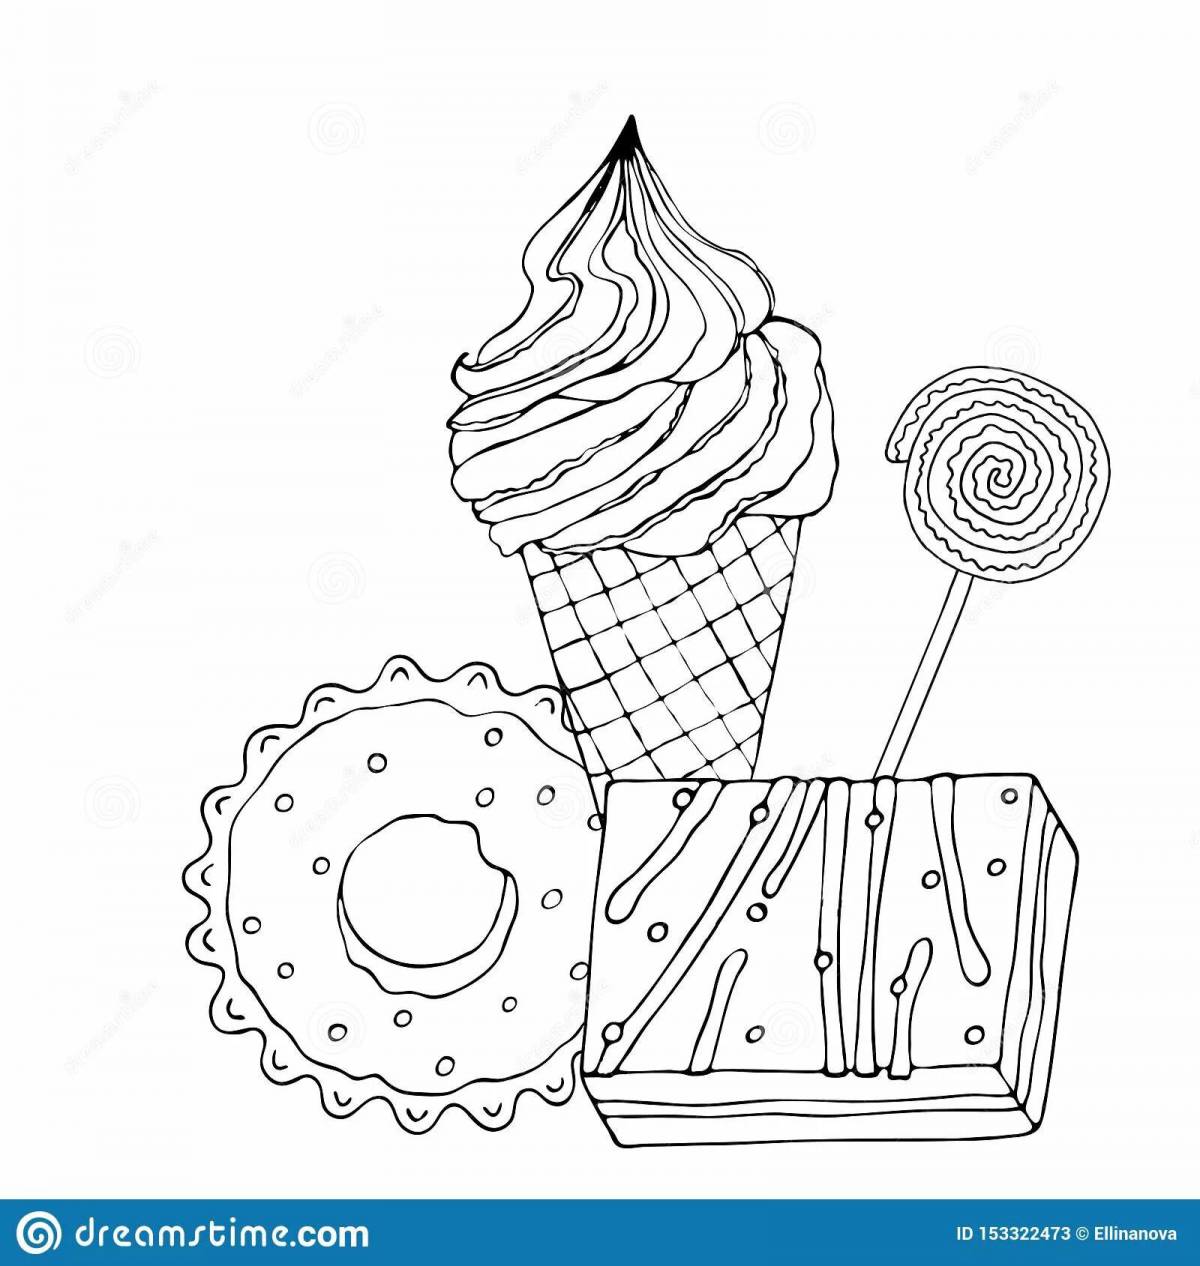 Rich donuts and ice cream coloring book